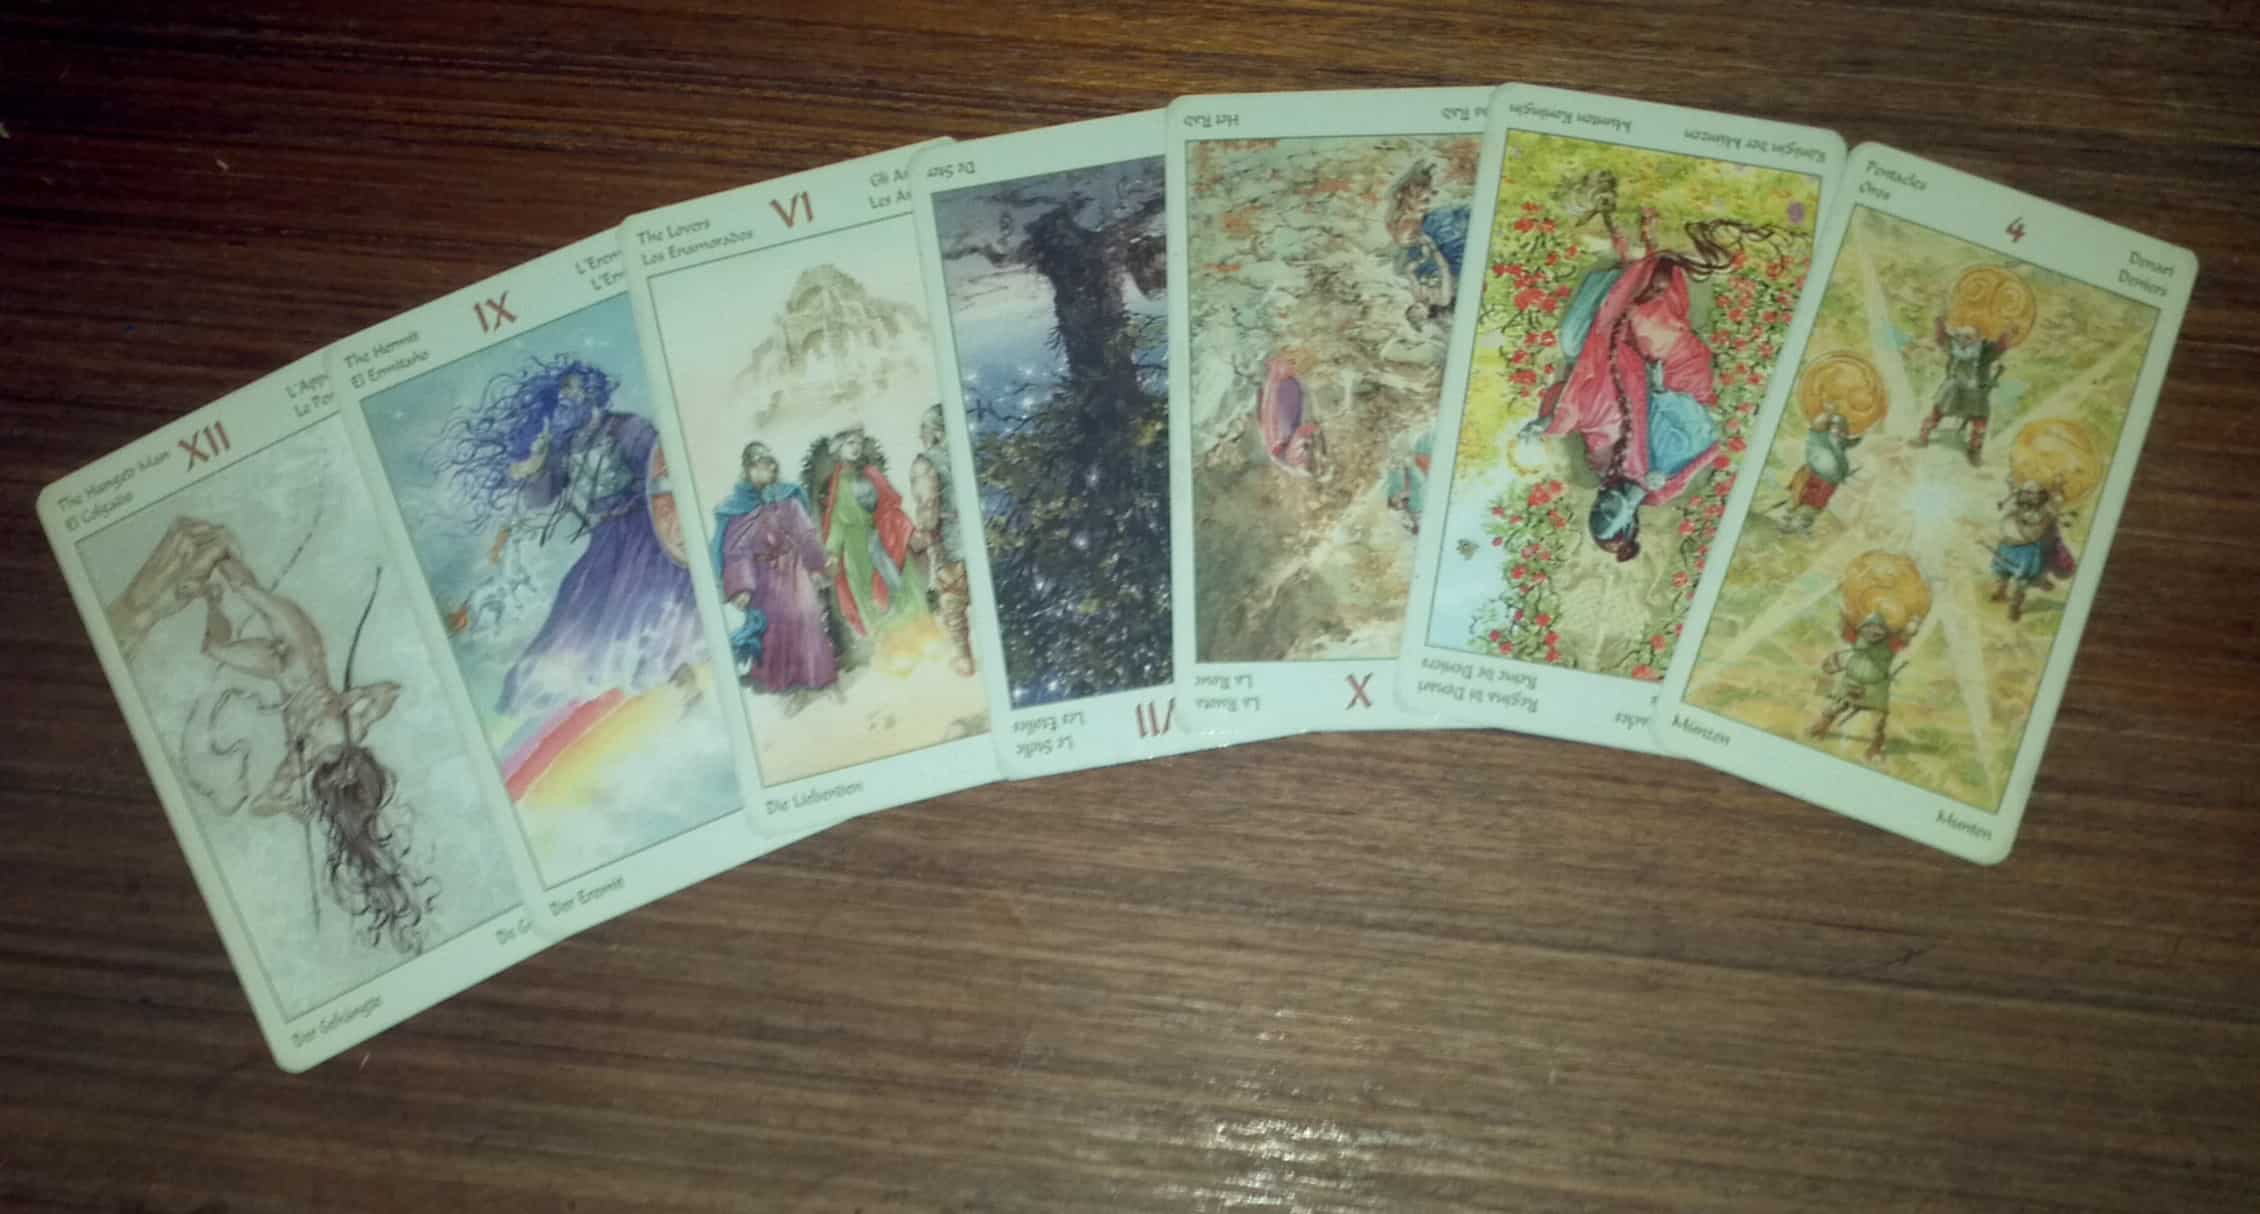 What would help me the most in finishing my book, a reading #tarot